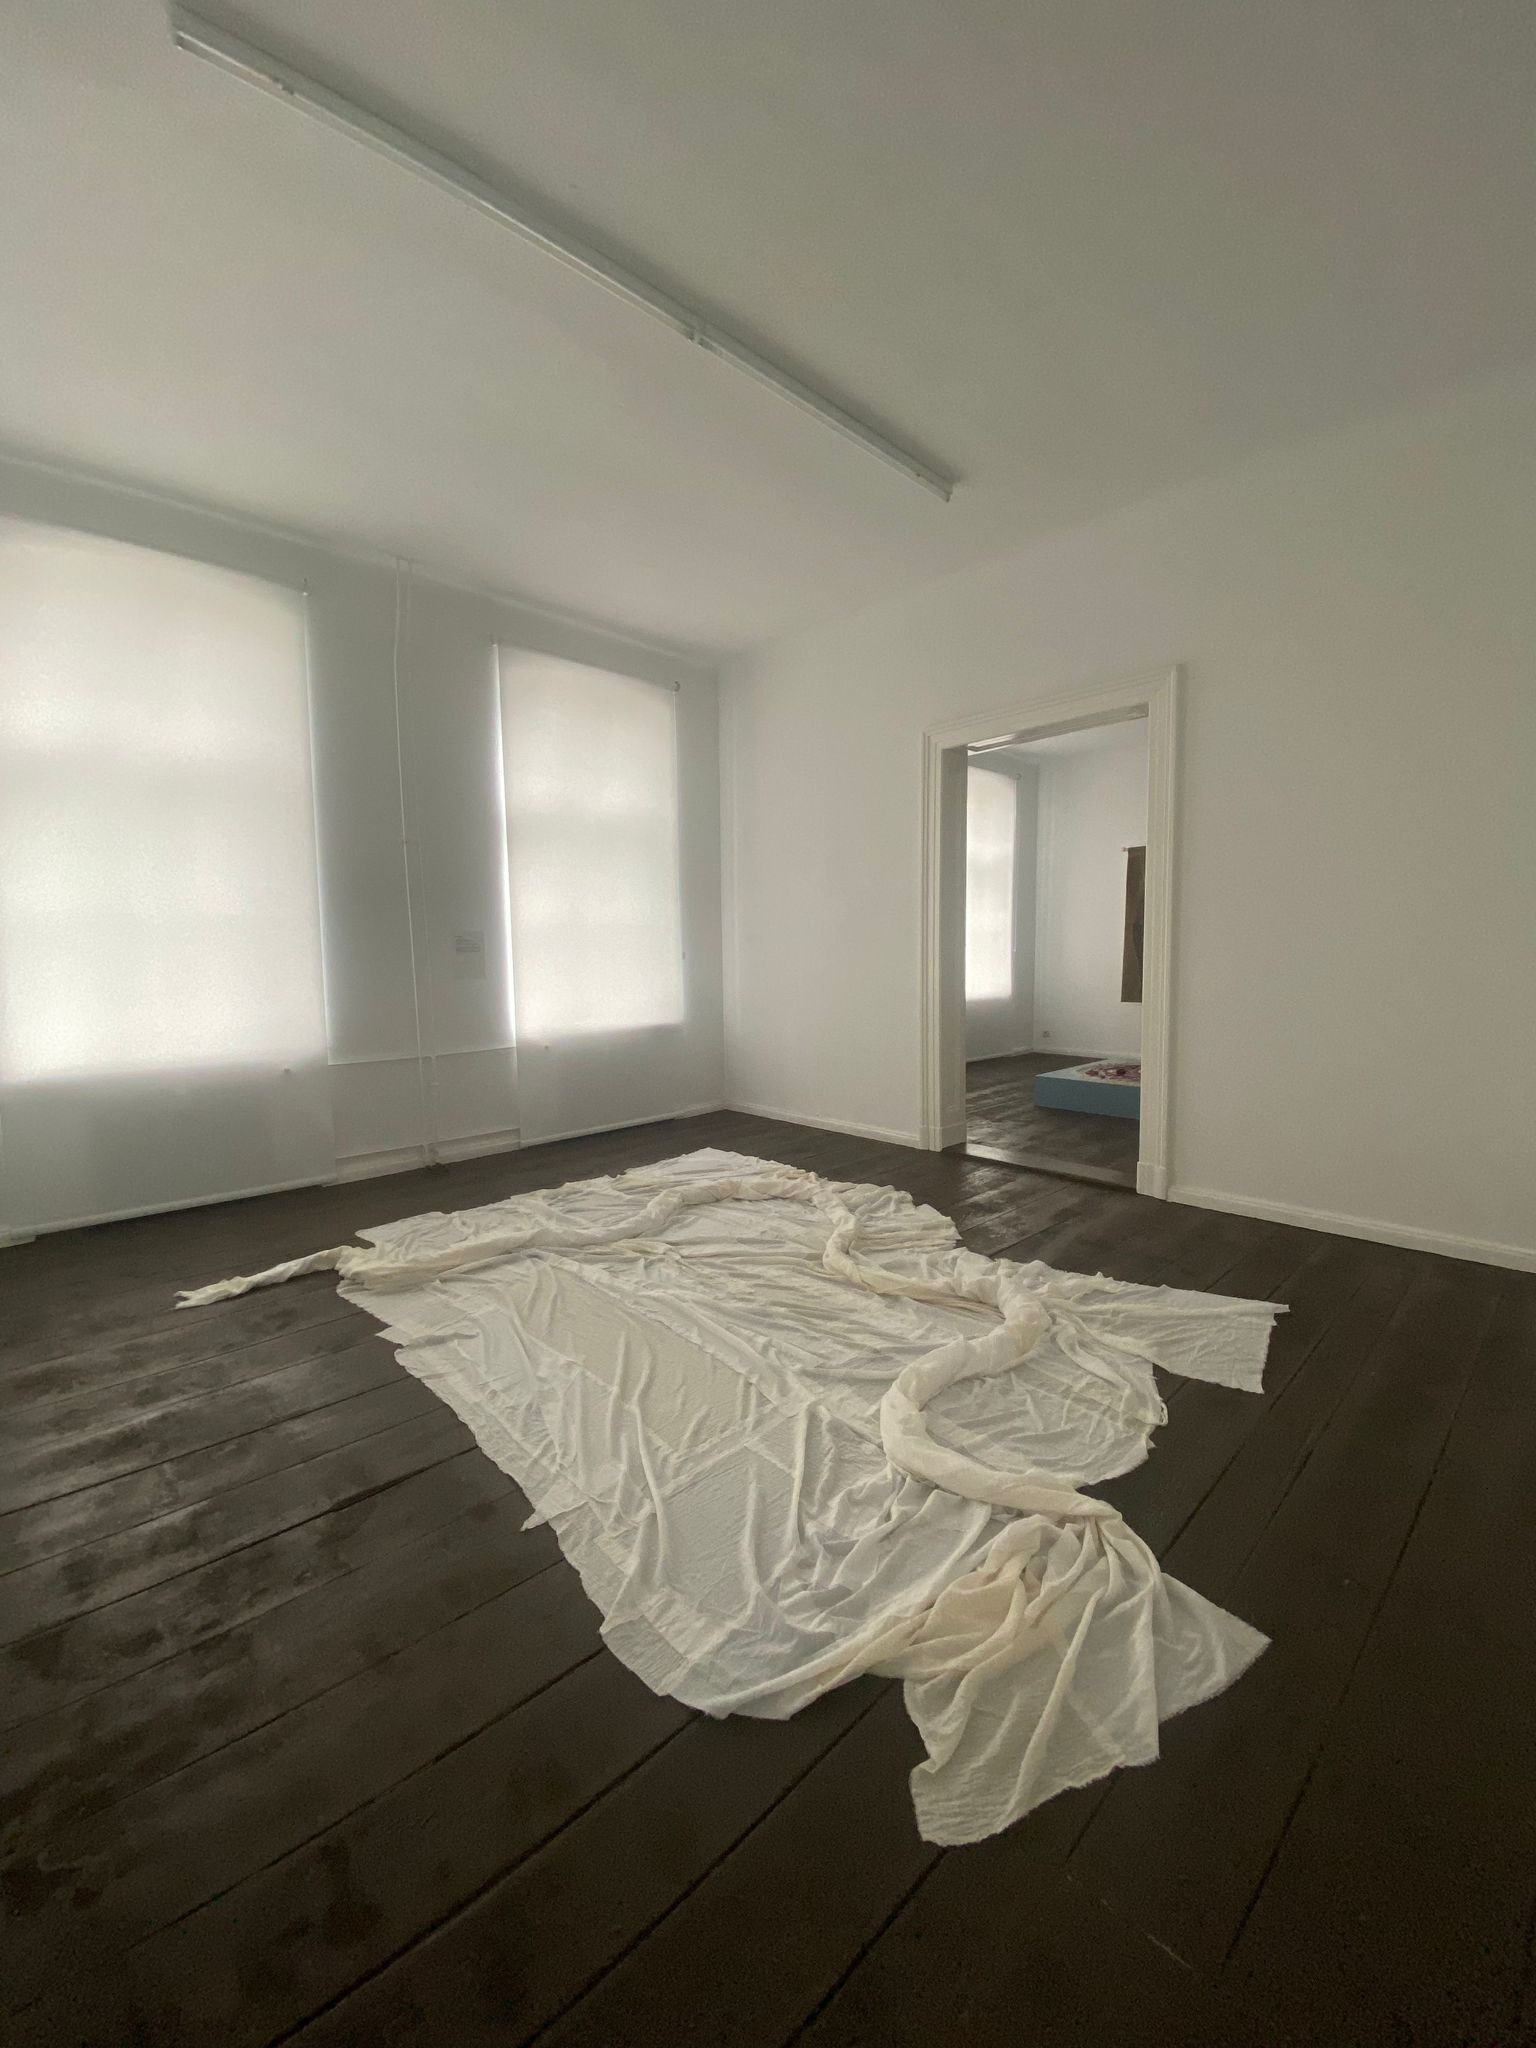 A patchwork of sheer white cloth bunches to form a serpentine organic form across the floor